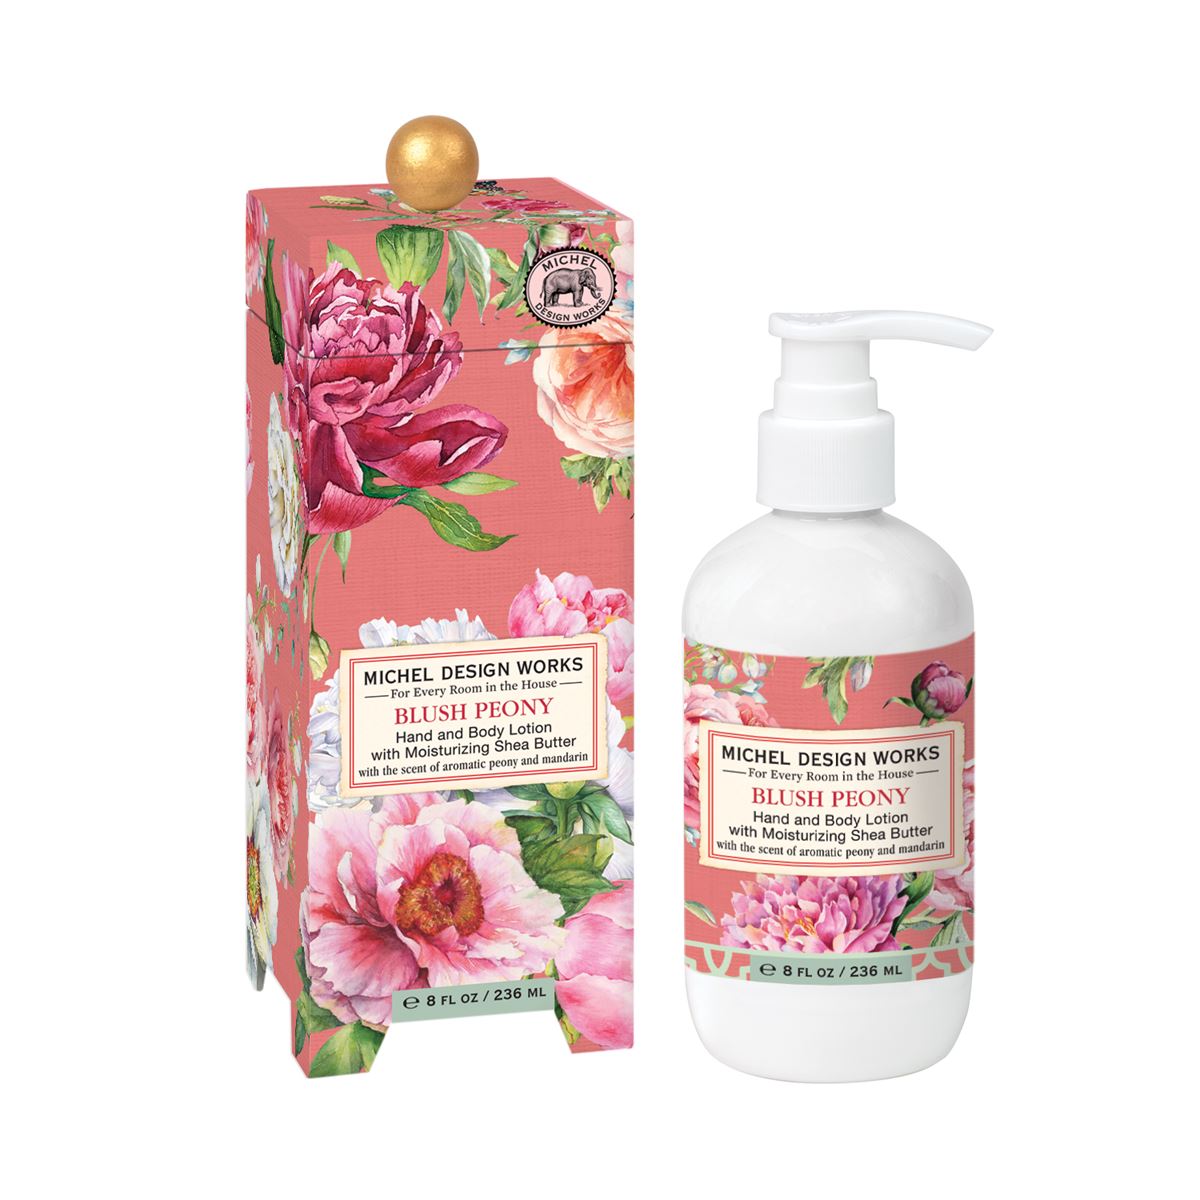 Blush Peony Lotion by Michel Design Works